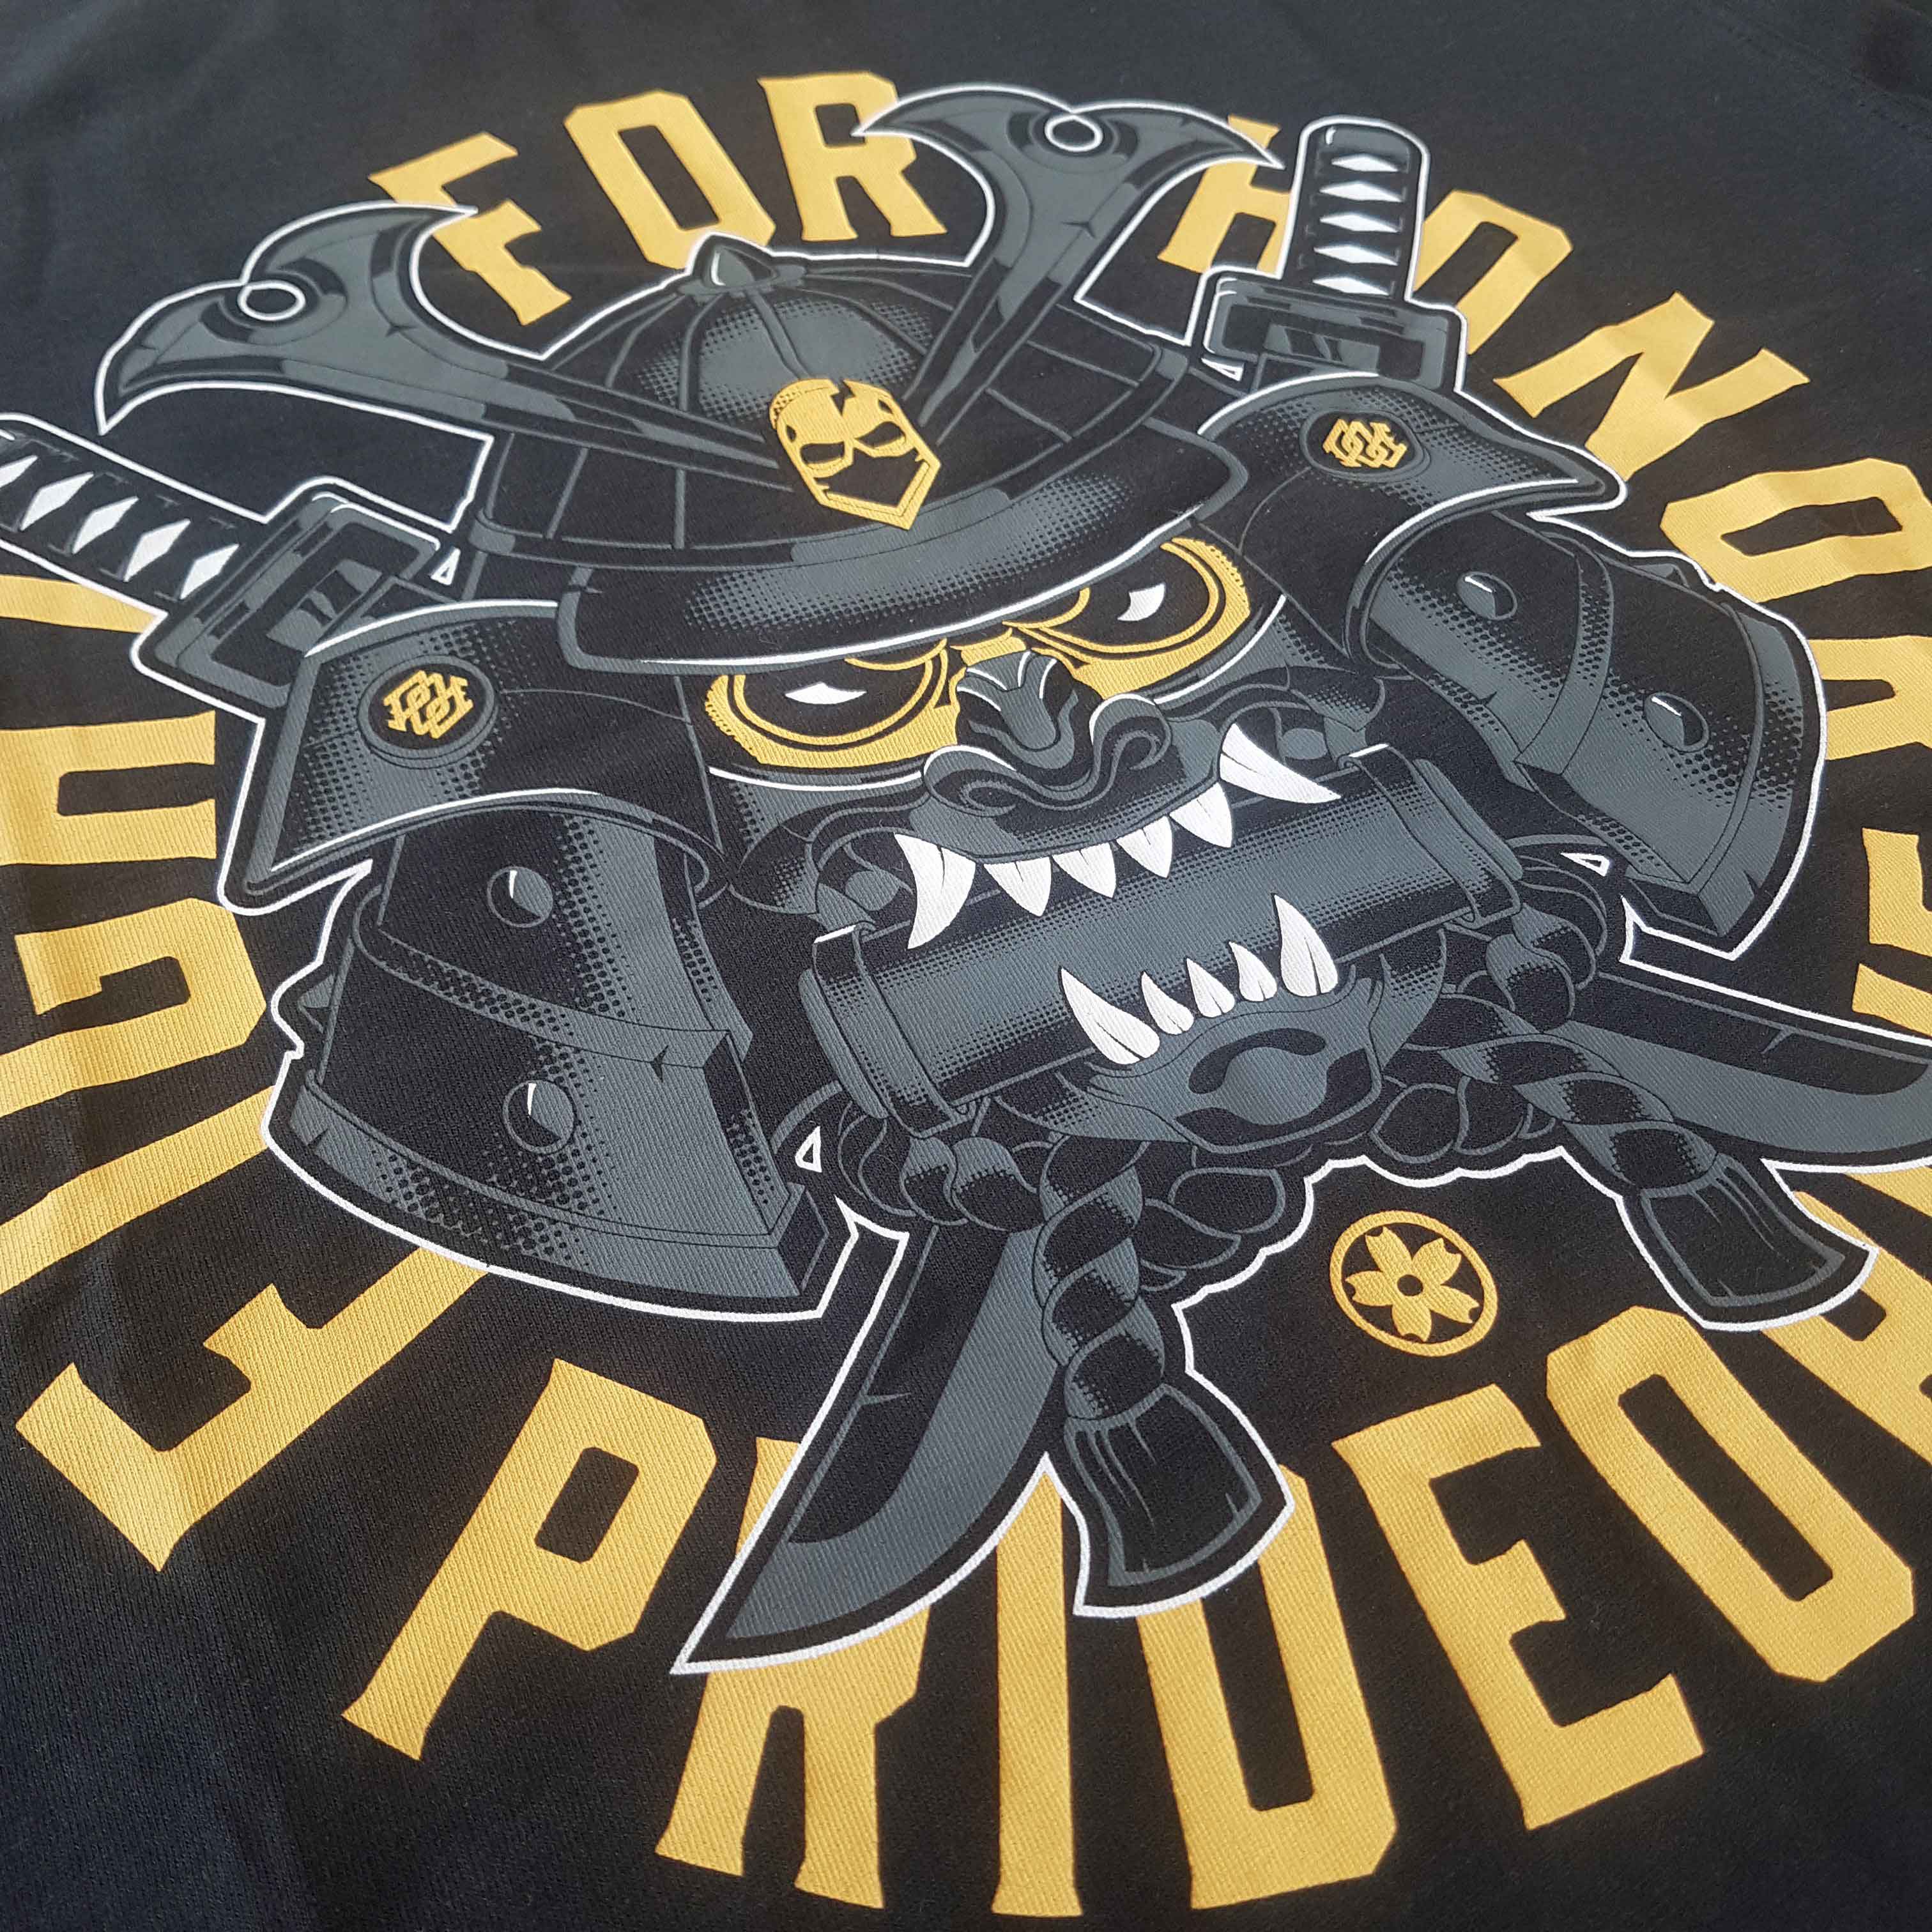 PRIDE OR DIE(PRiDEorDiE)／プライド オア ダイ　Tシャツ　　FIGHT FOR HONOR T-shirt／FIGHT FOR HONOR Tシャツ